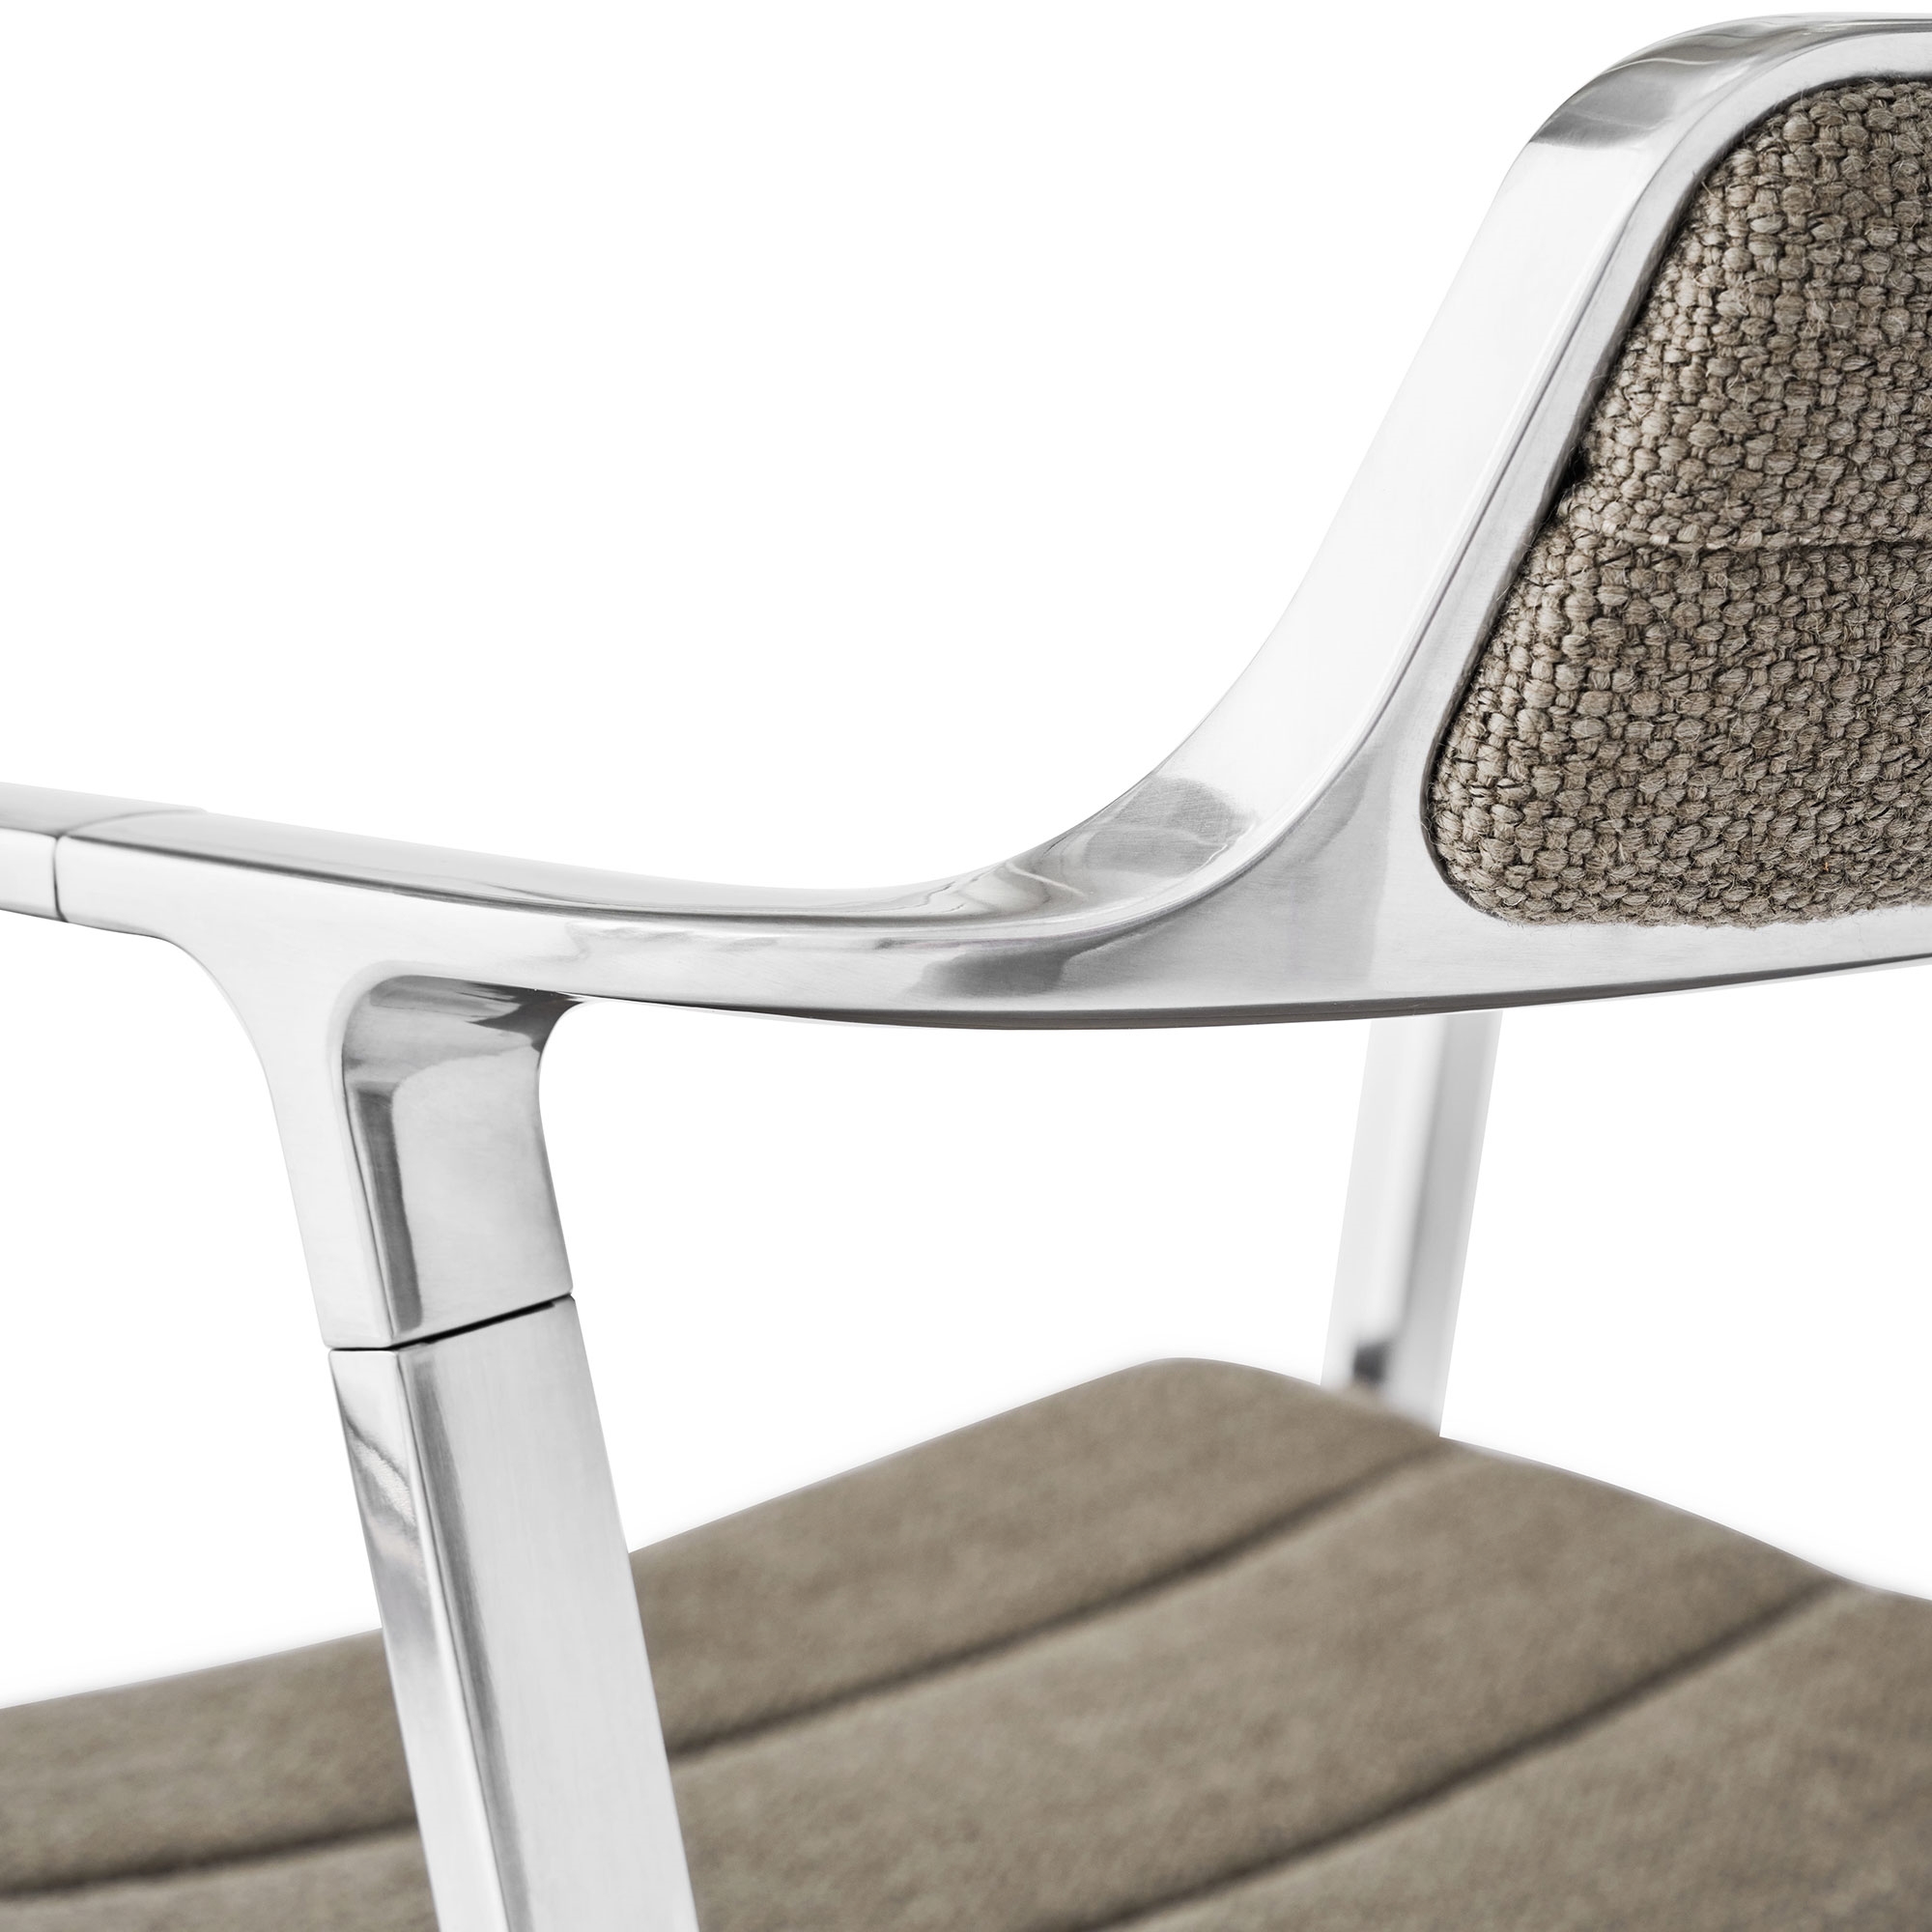 VIPP 452 // SWIVEL CHAIR - SAND TEXTILE, POLISHED FRAME, CASTERS